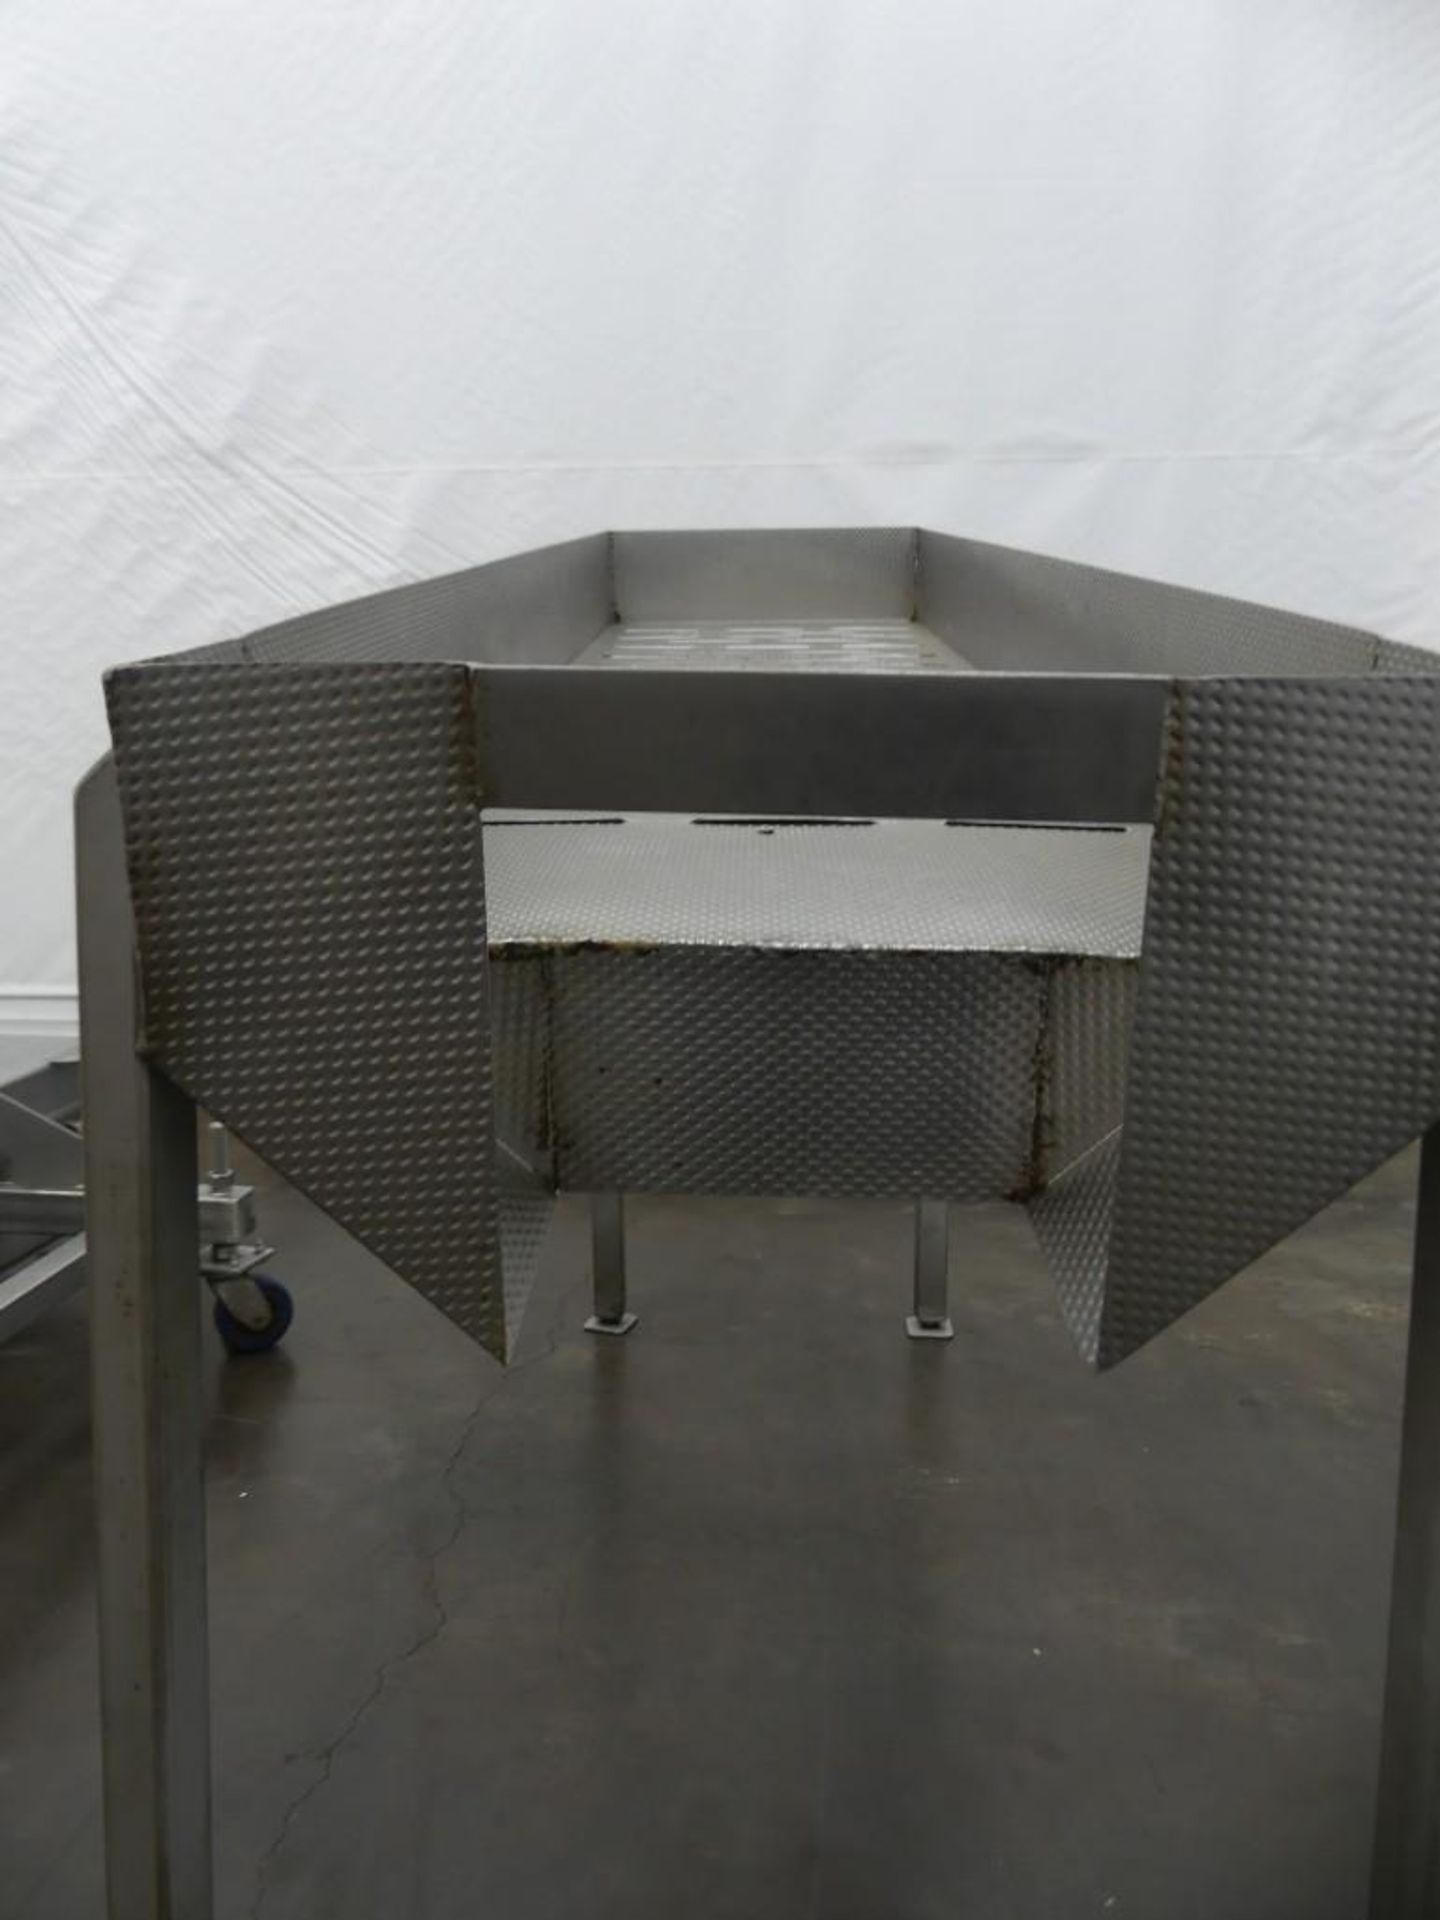 Stainless Steel Premade Bagging System - Image 5 of 24